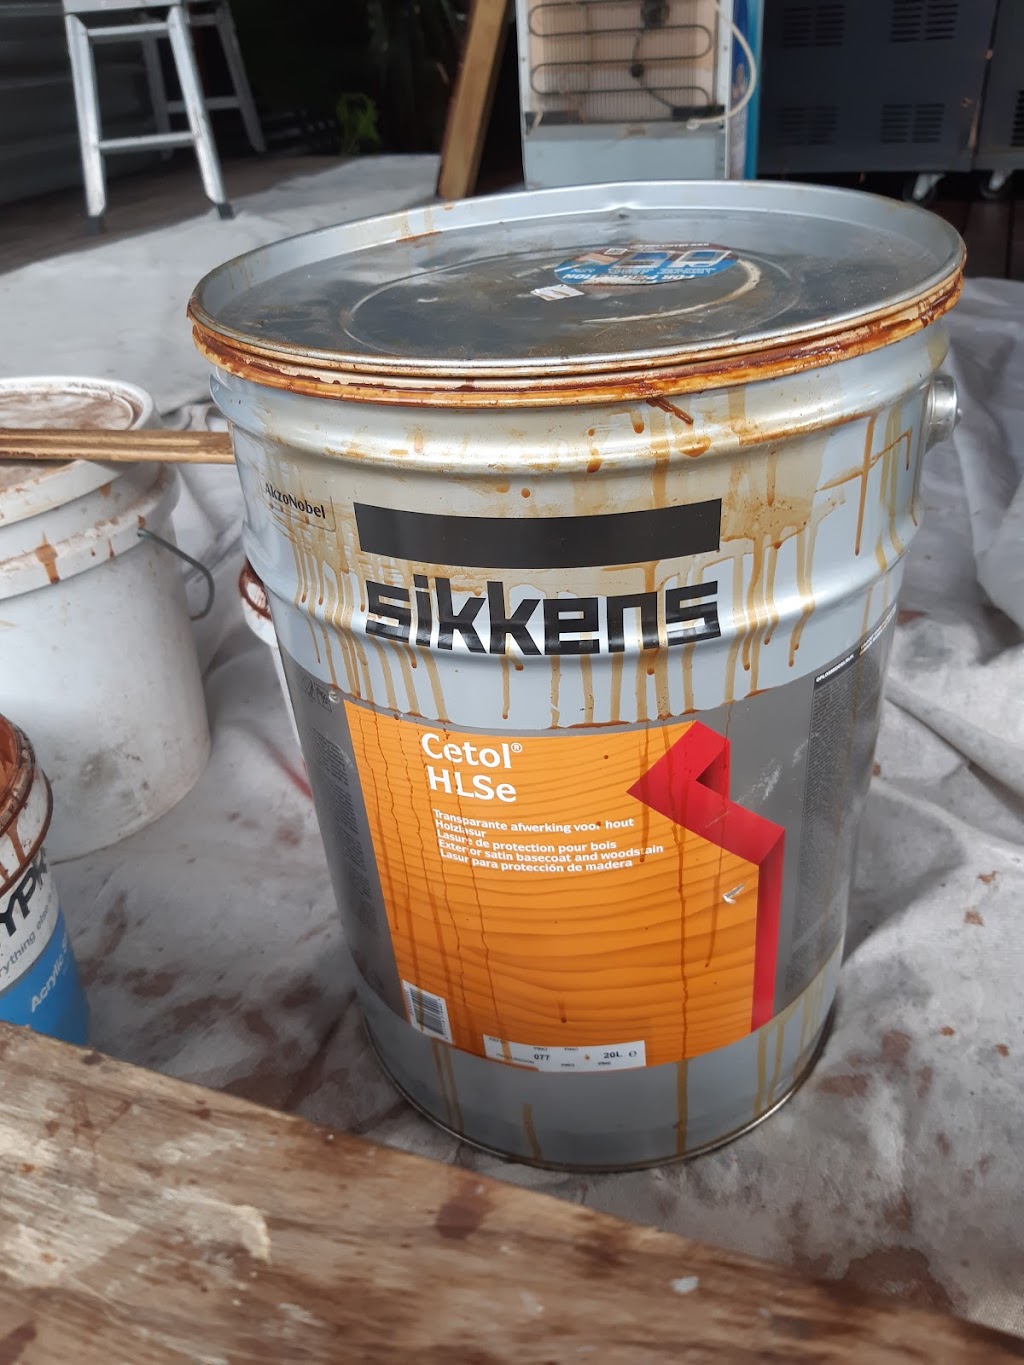 Sikkens Woodcare Products | Unit 9/350 Edgar St, Condell Park NSW 2200, Australia | Phone: 1300 745 536